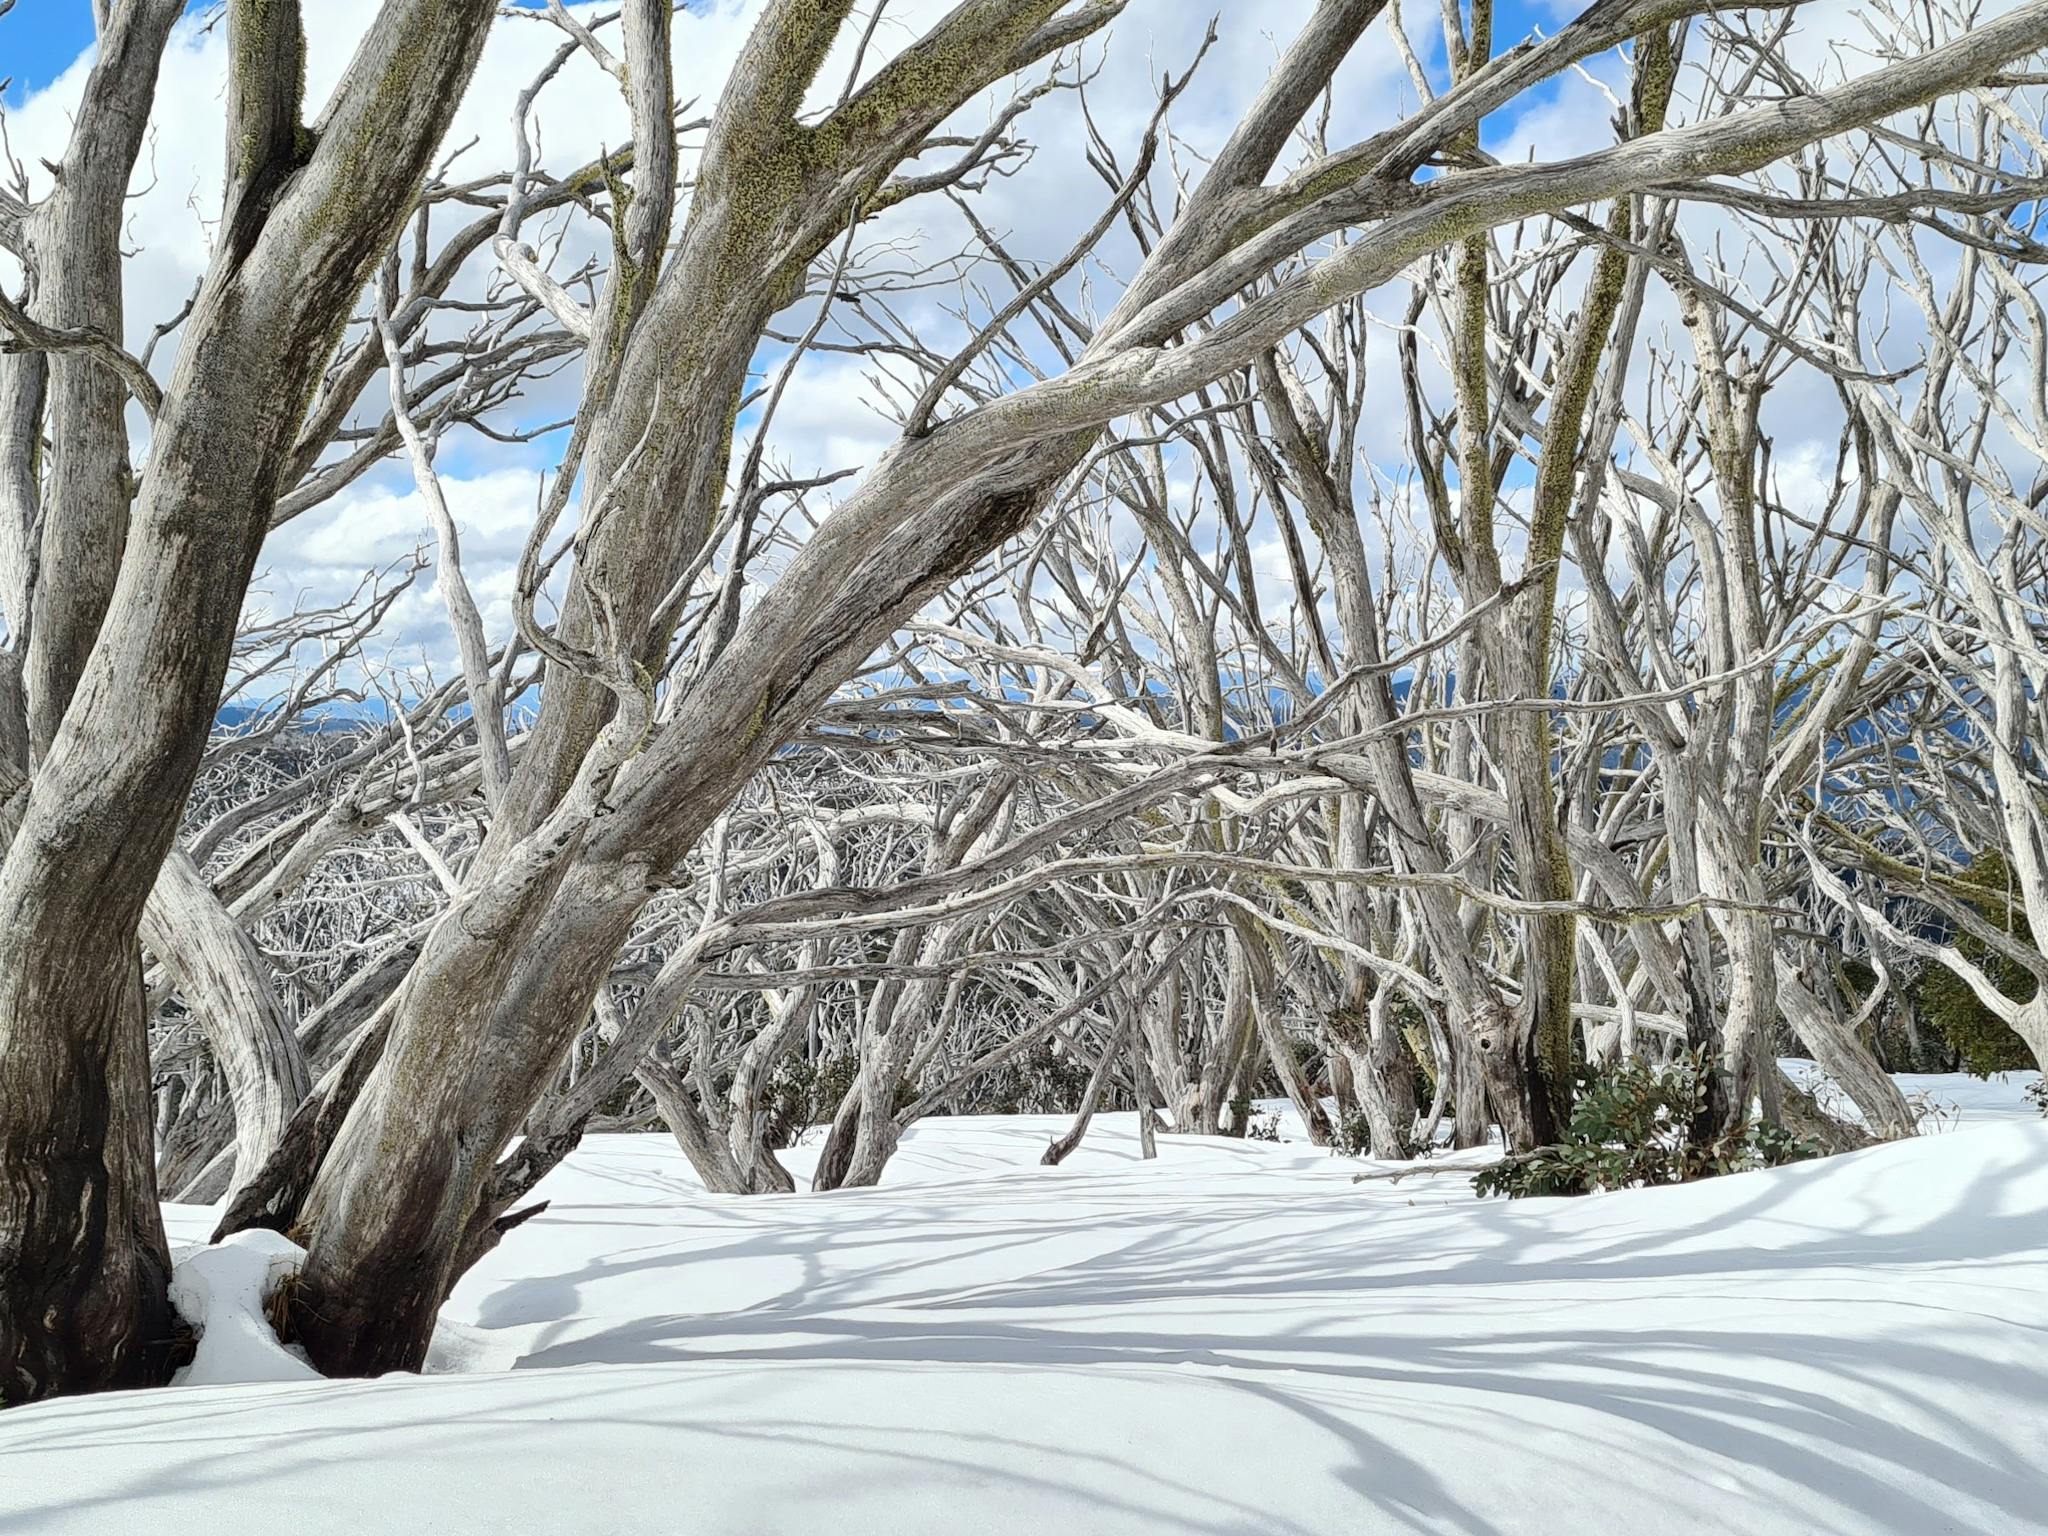 Dead Snow Gums surrounded by snow, adding beauty to the landscape.